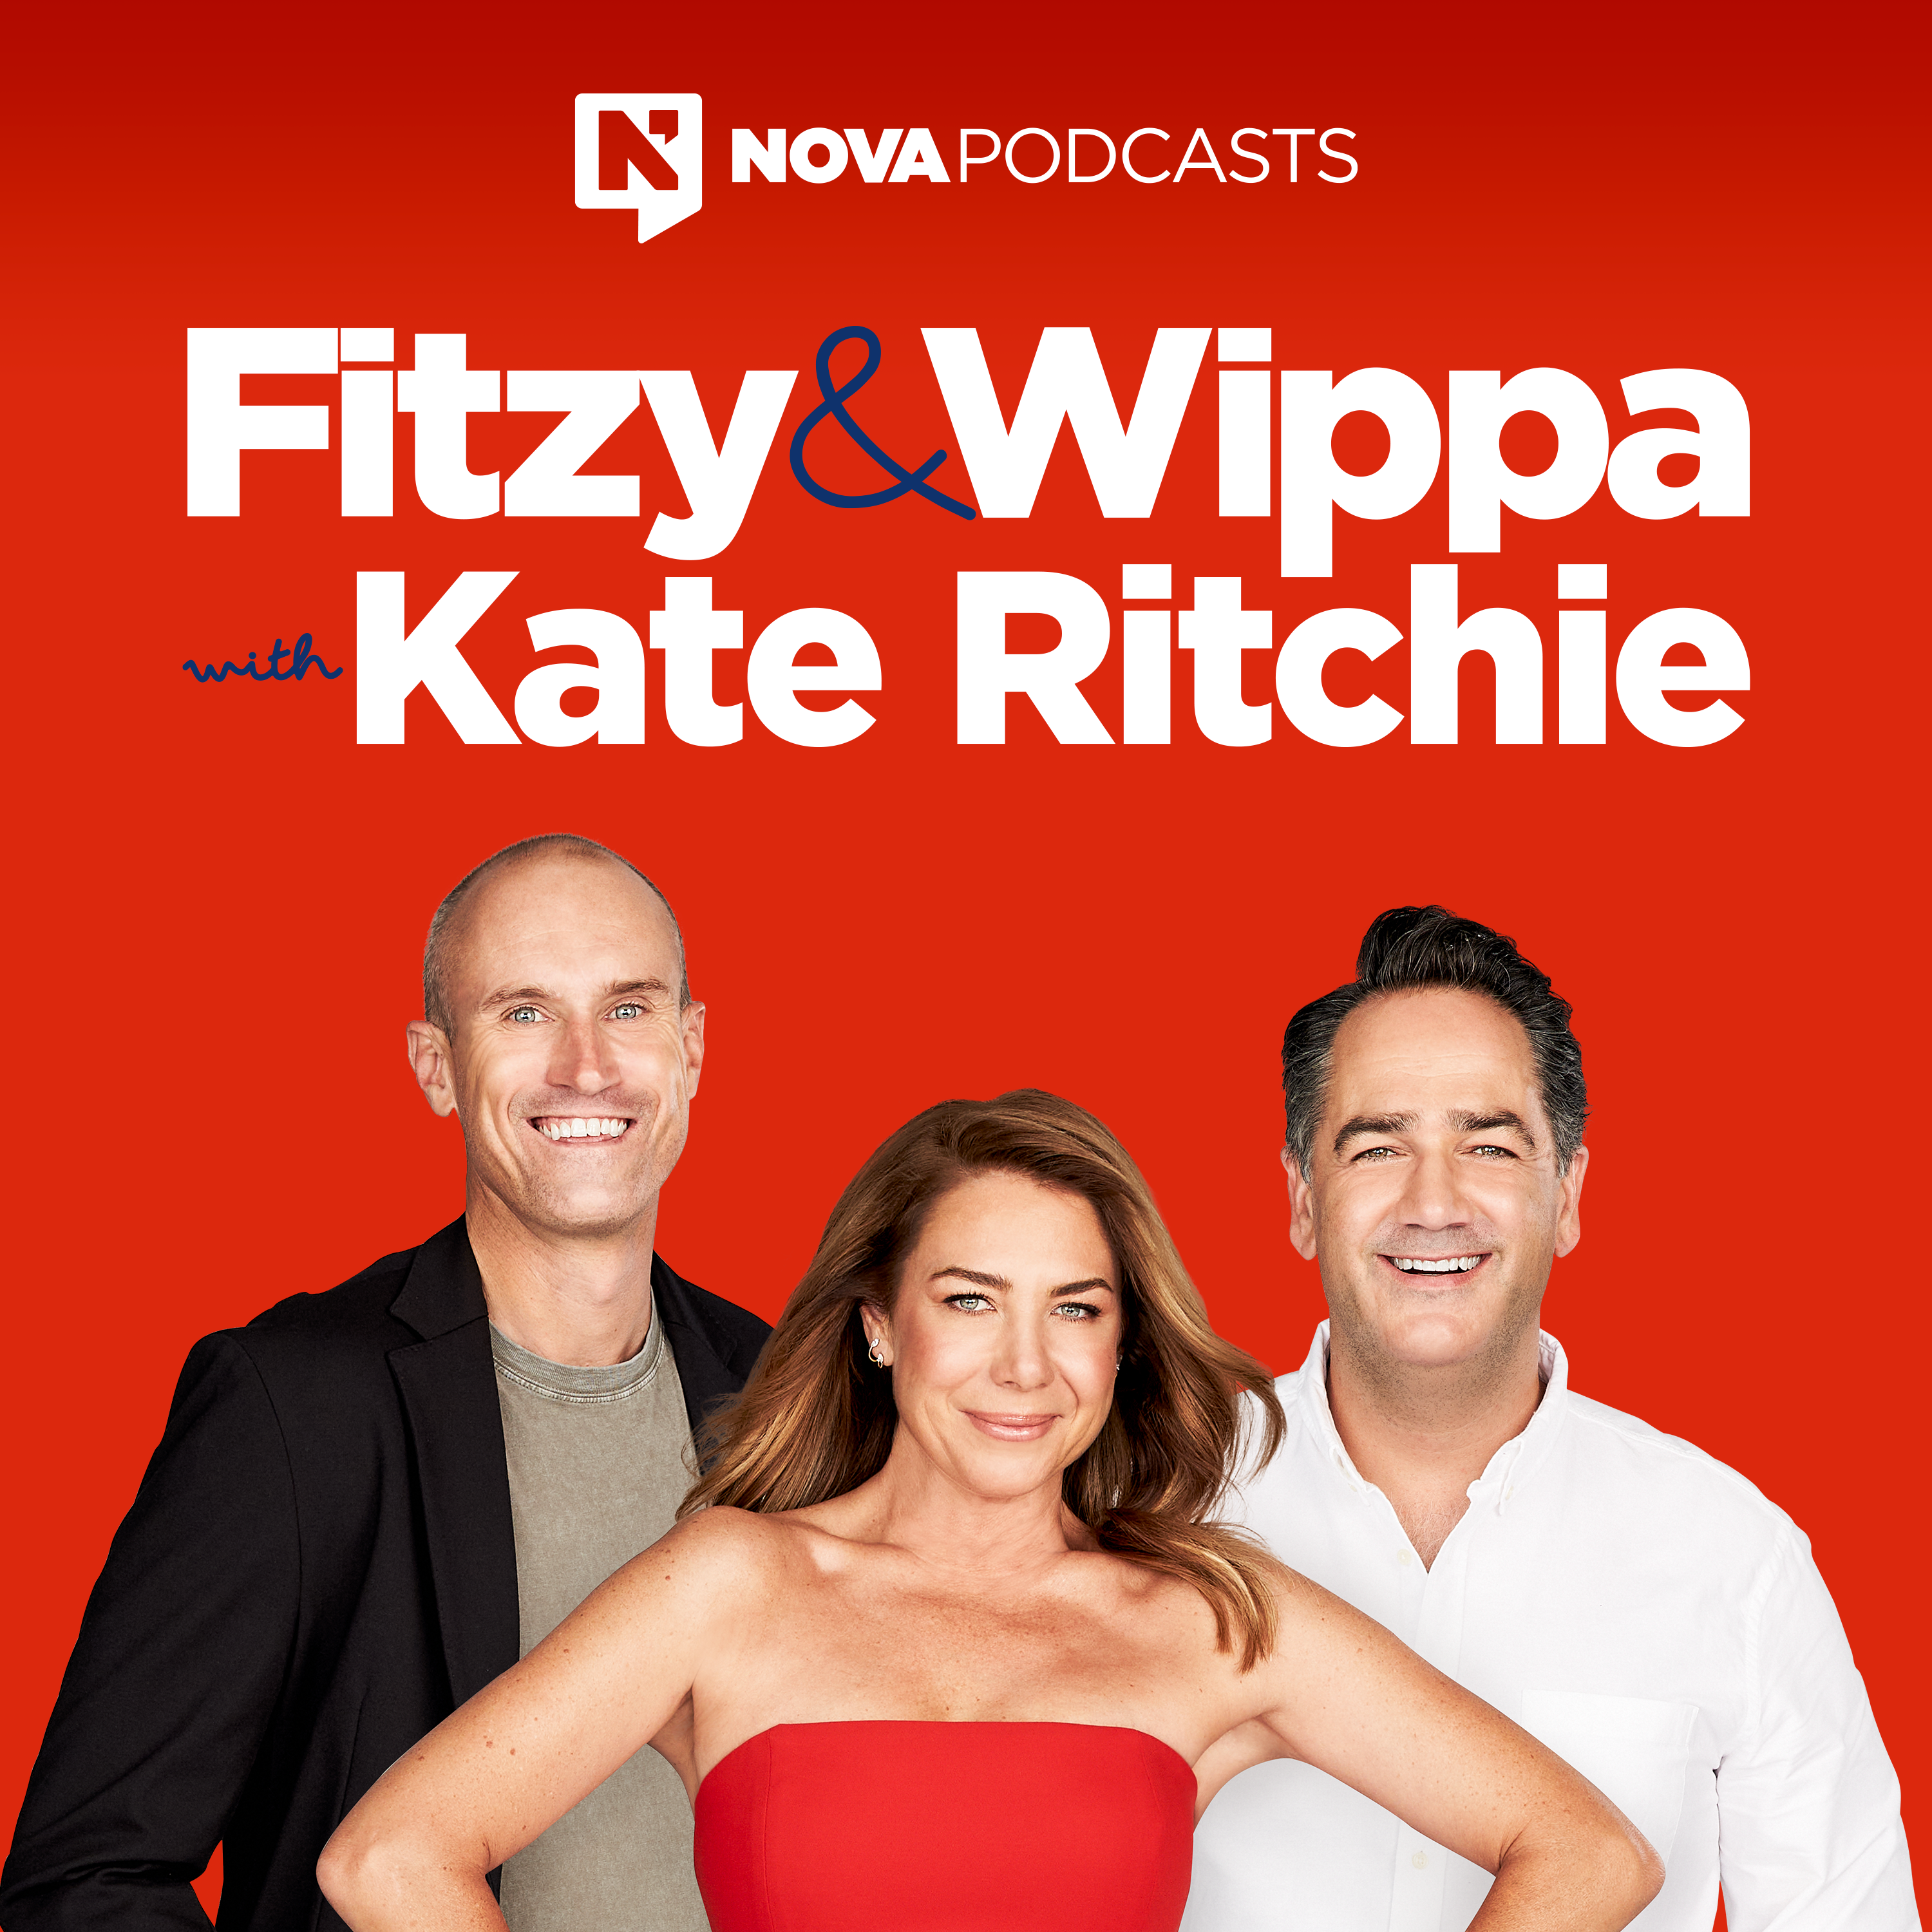 CATCH UP – Karl Stefanovic talks baby names with Fitzy & Wippa